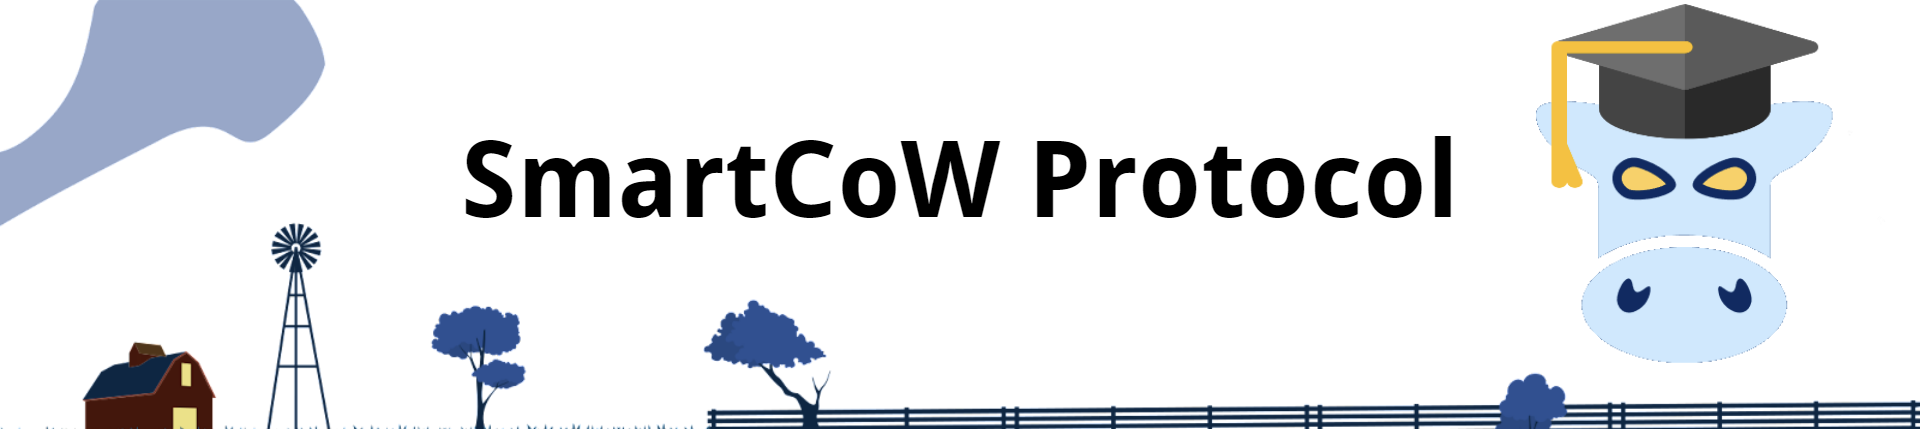 SmartCow Banner